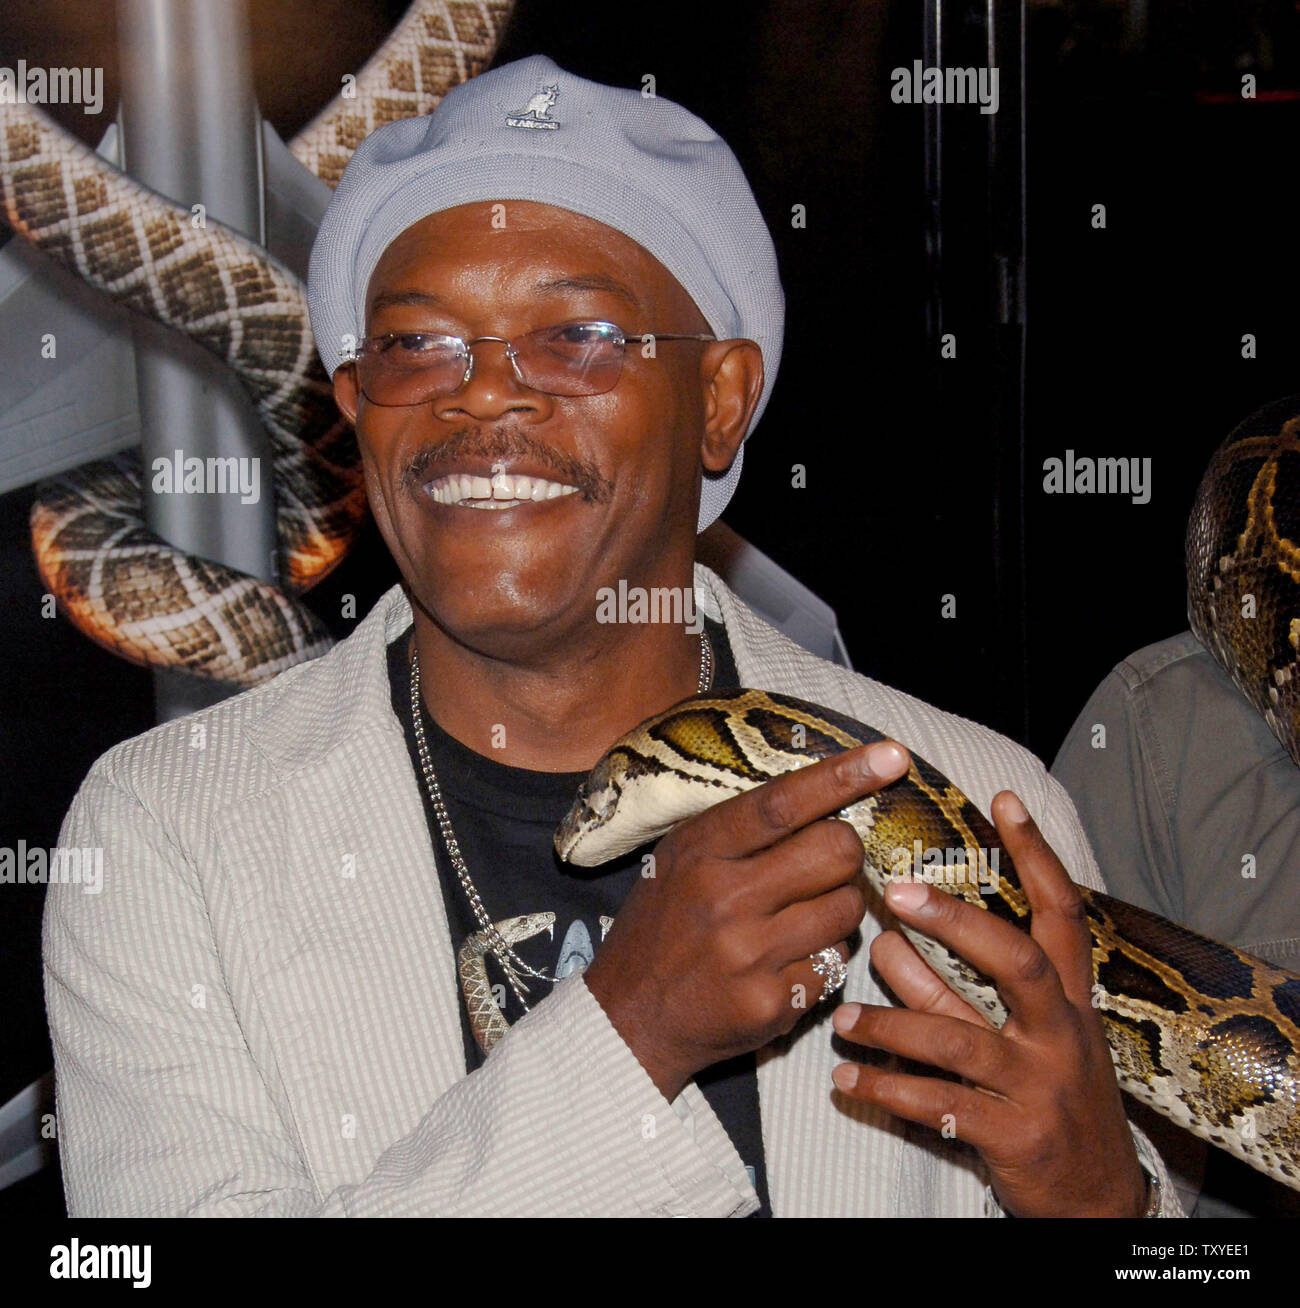 Cast member Samuel L. Jackson handles Kitty Jr., a Burmese python, at the premiere of 'Snakes on a Plane' at  Grauman's Chinese Theatre in the Hollywood section of Los Angeles, California on August 17, 2006. The movie opens in the U.S. on August 18. (UPI Photo/Jim Ruymen) Stock Photo